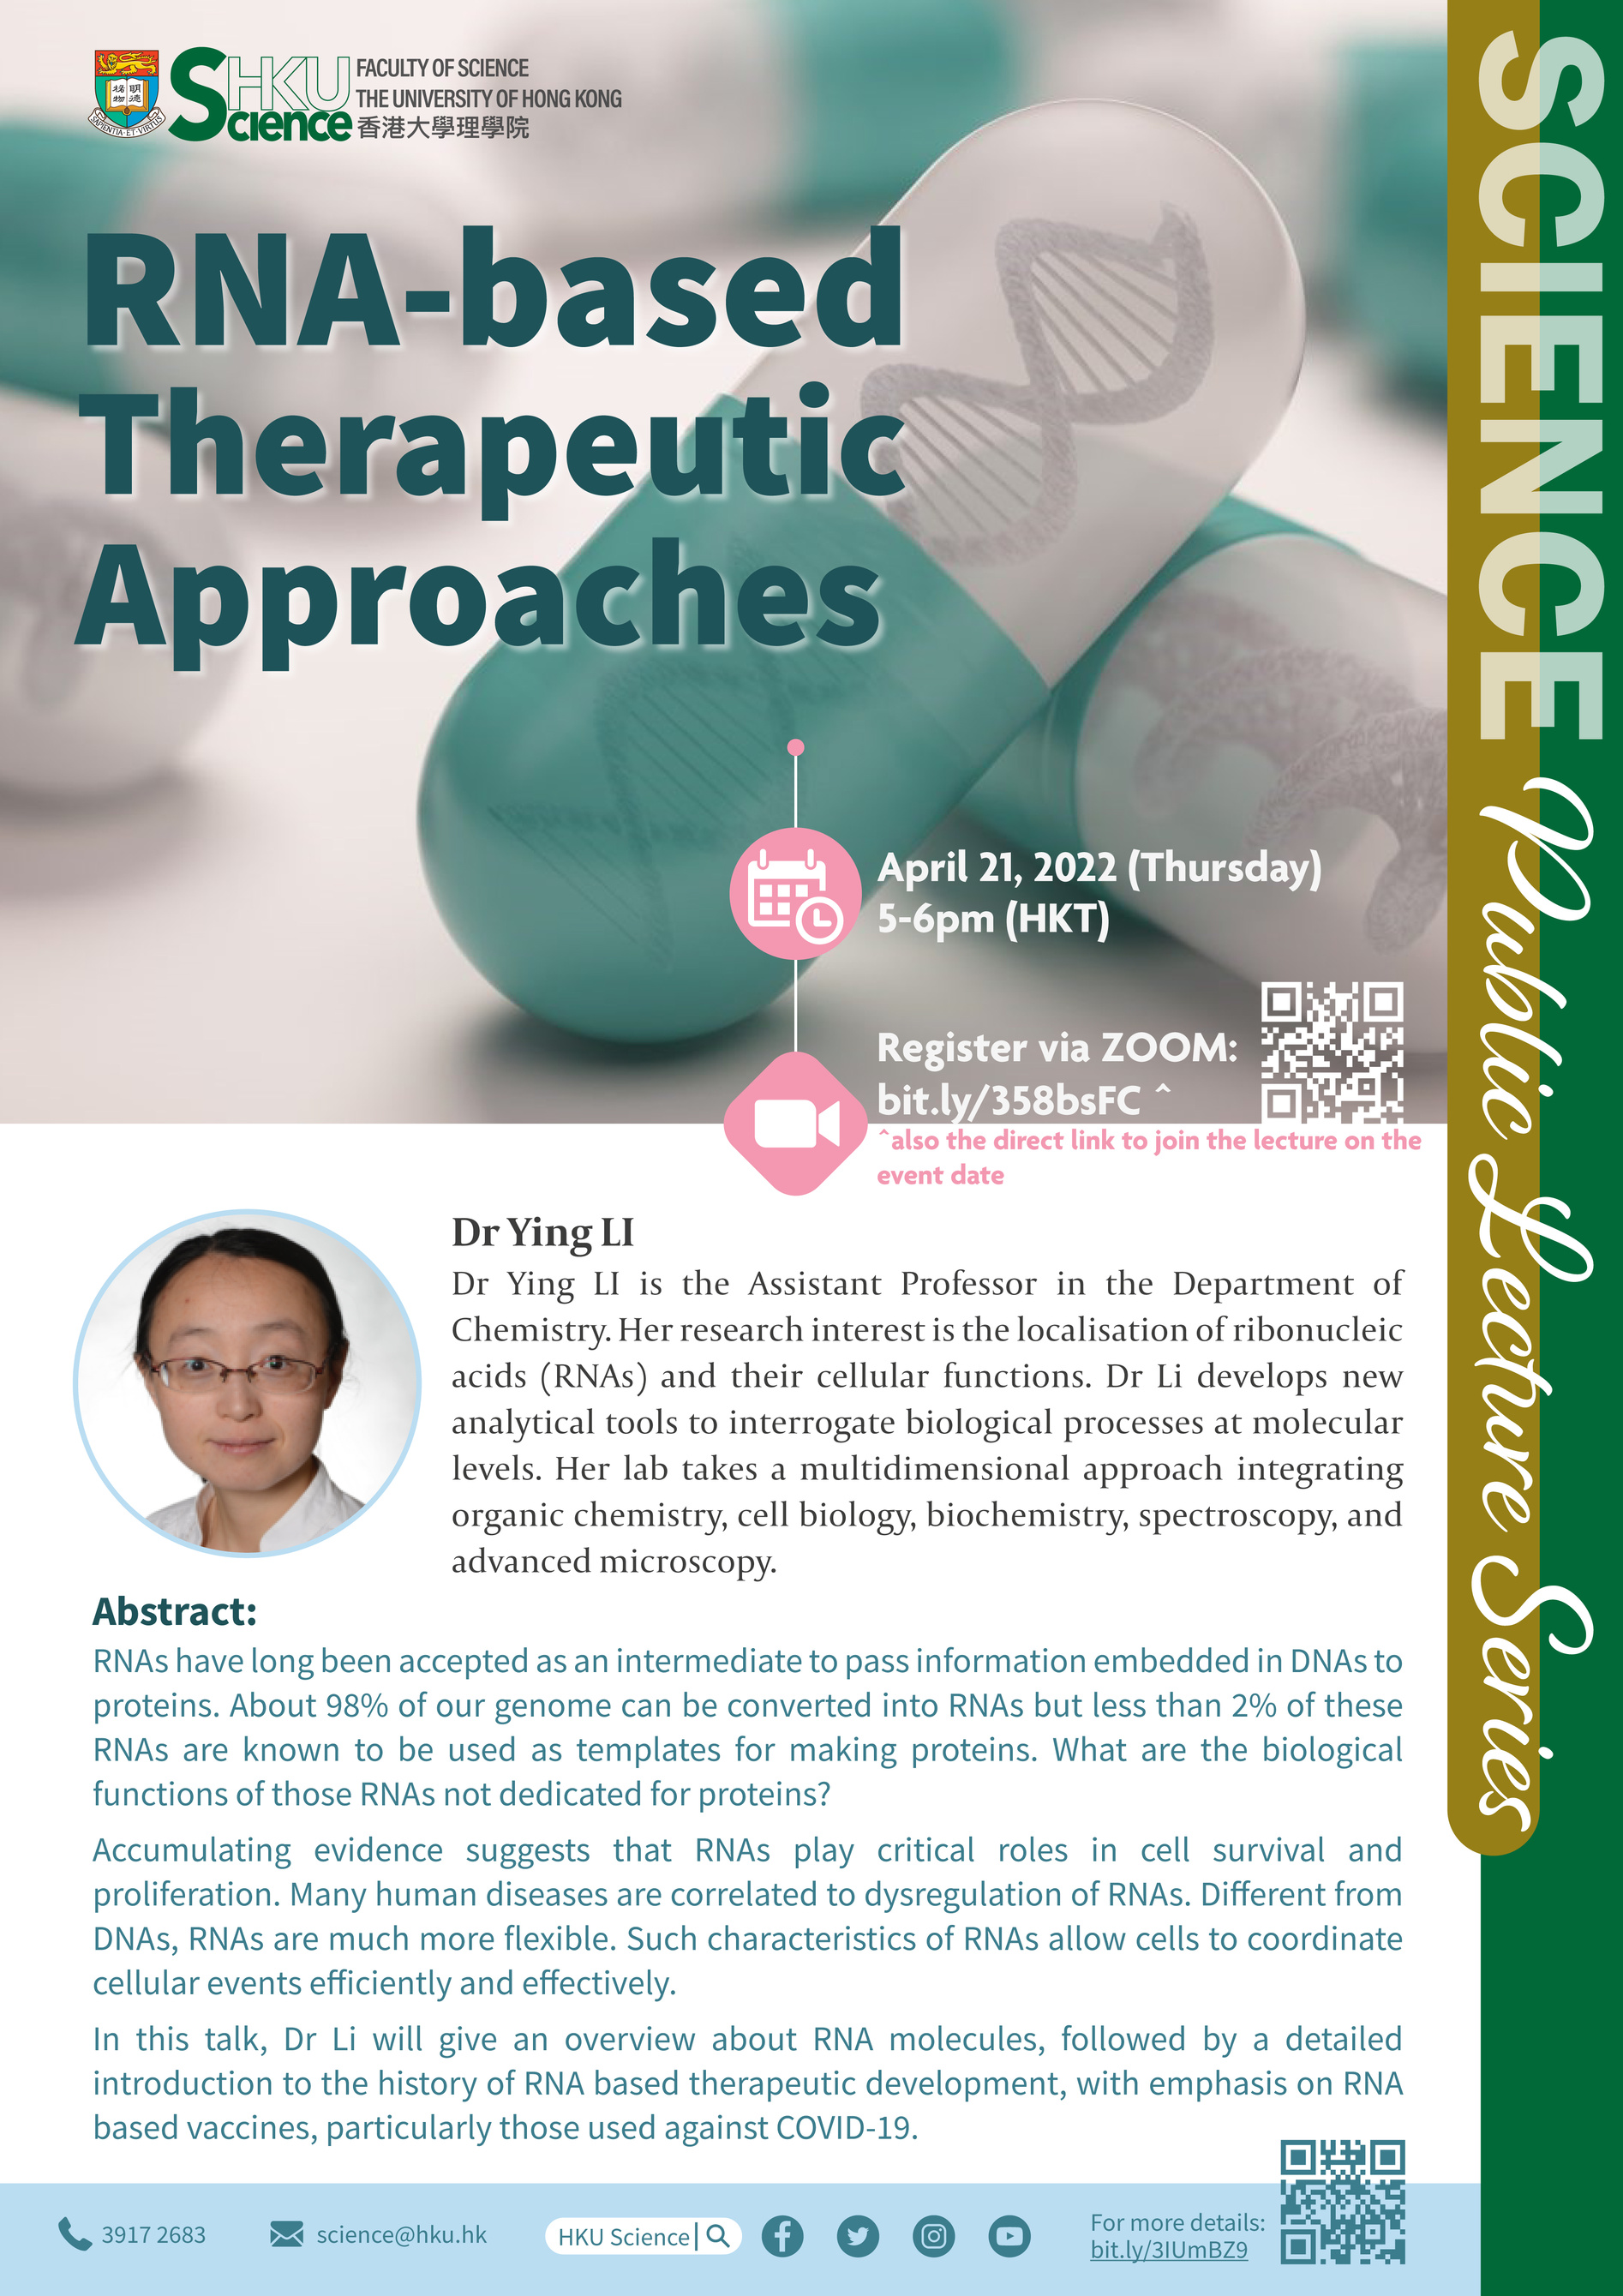 HKU Science Public Lecture Series - RNA-based Therapeutic Approaches (Apr 21, 2022)